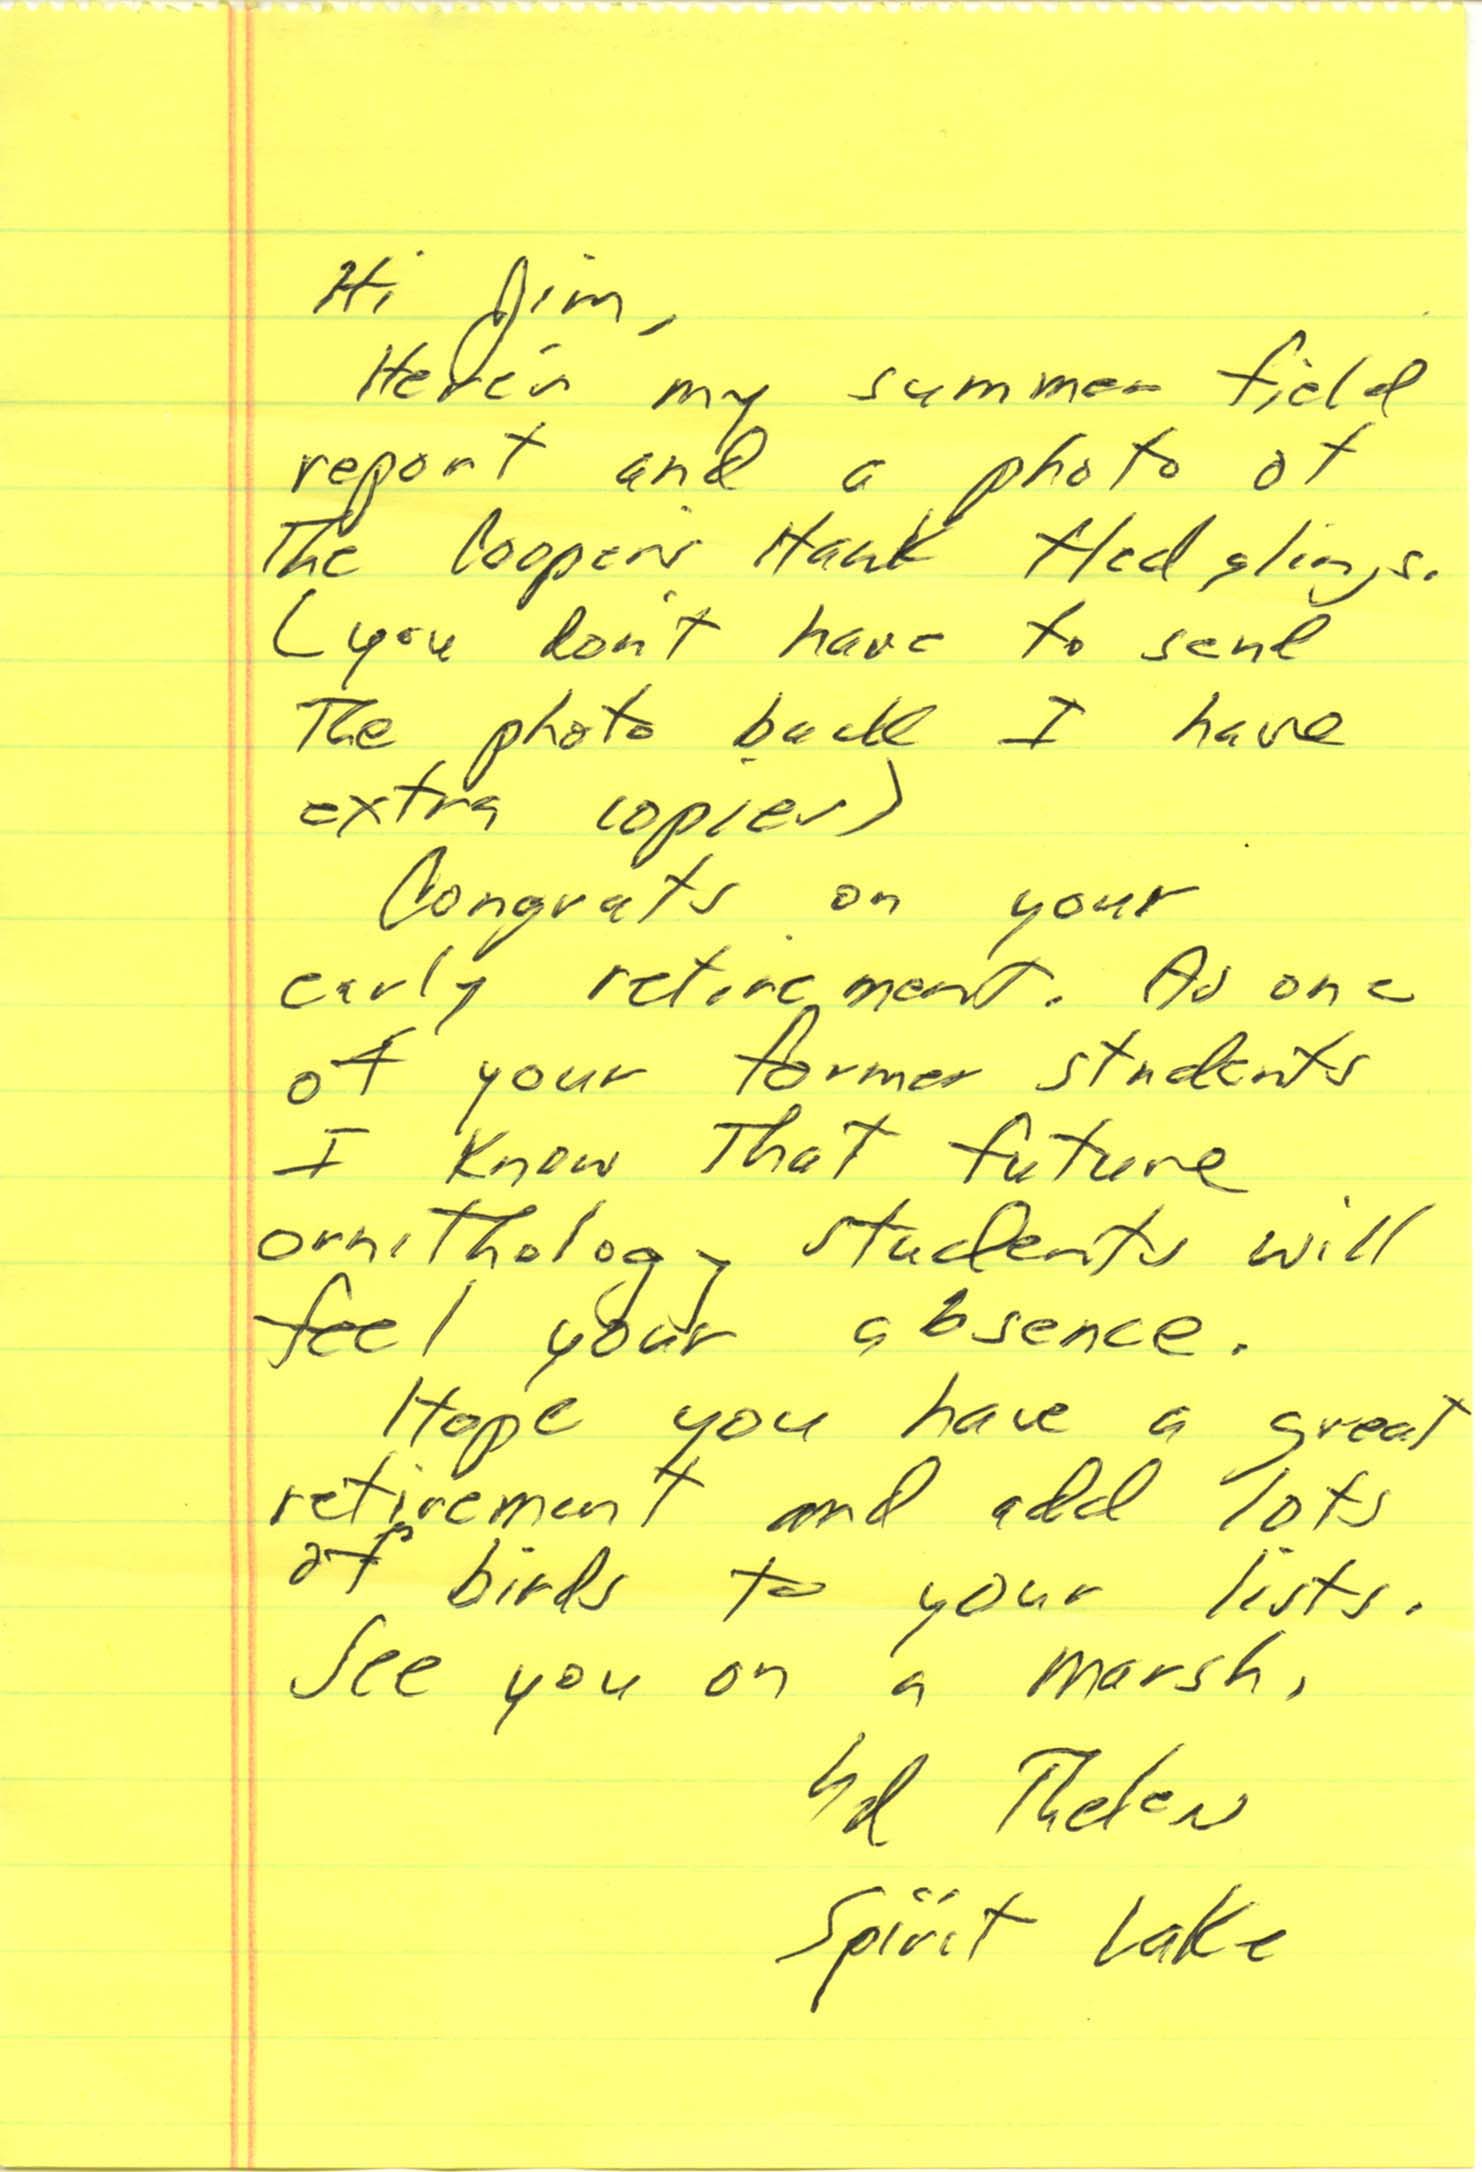 Field notes, photograph, and letter to James J. Dinsmore contributed by Ed Thelen, summer 2002